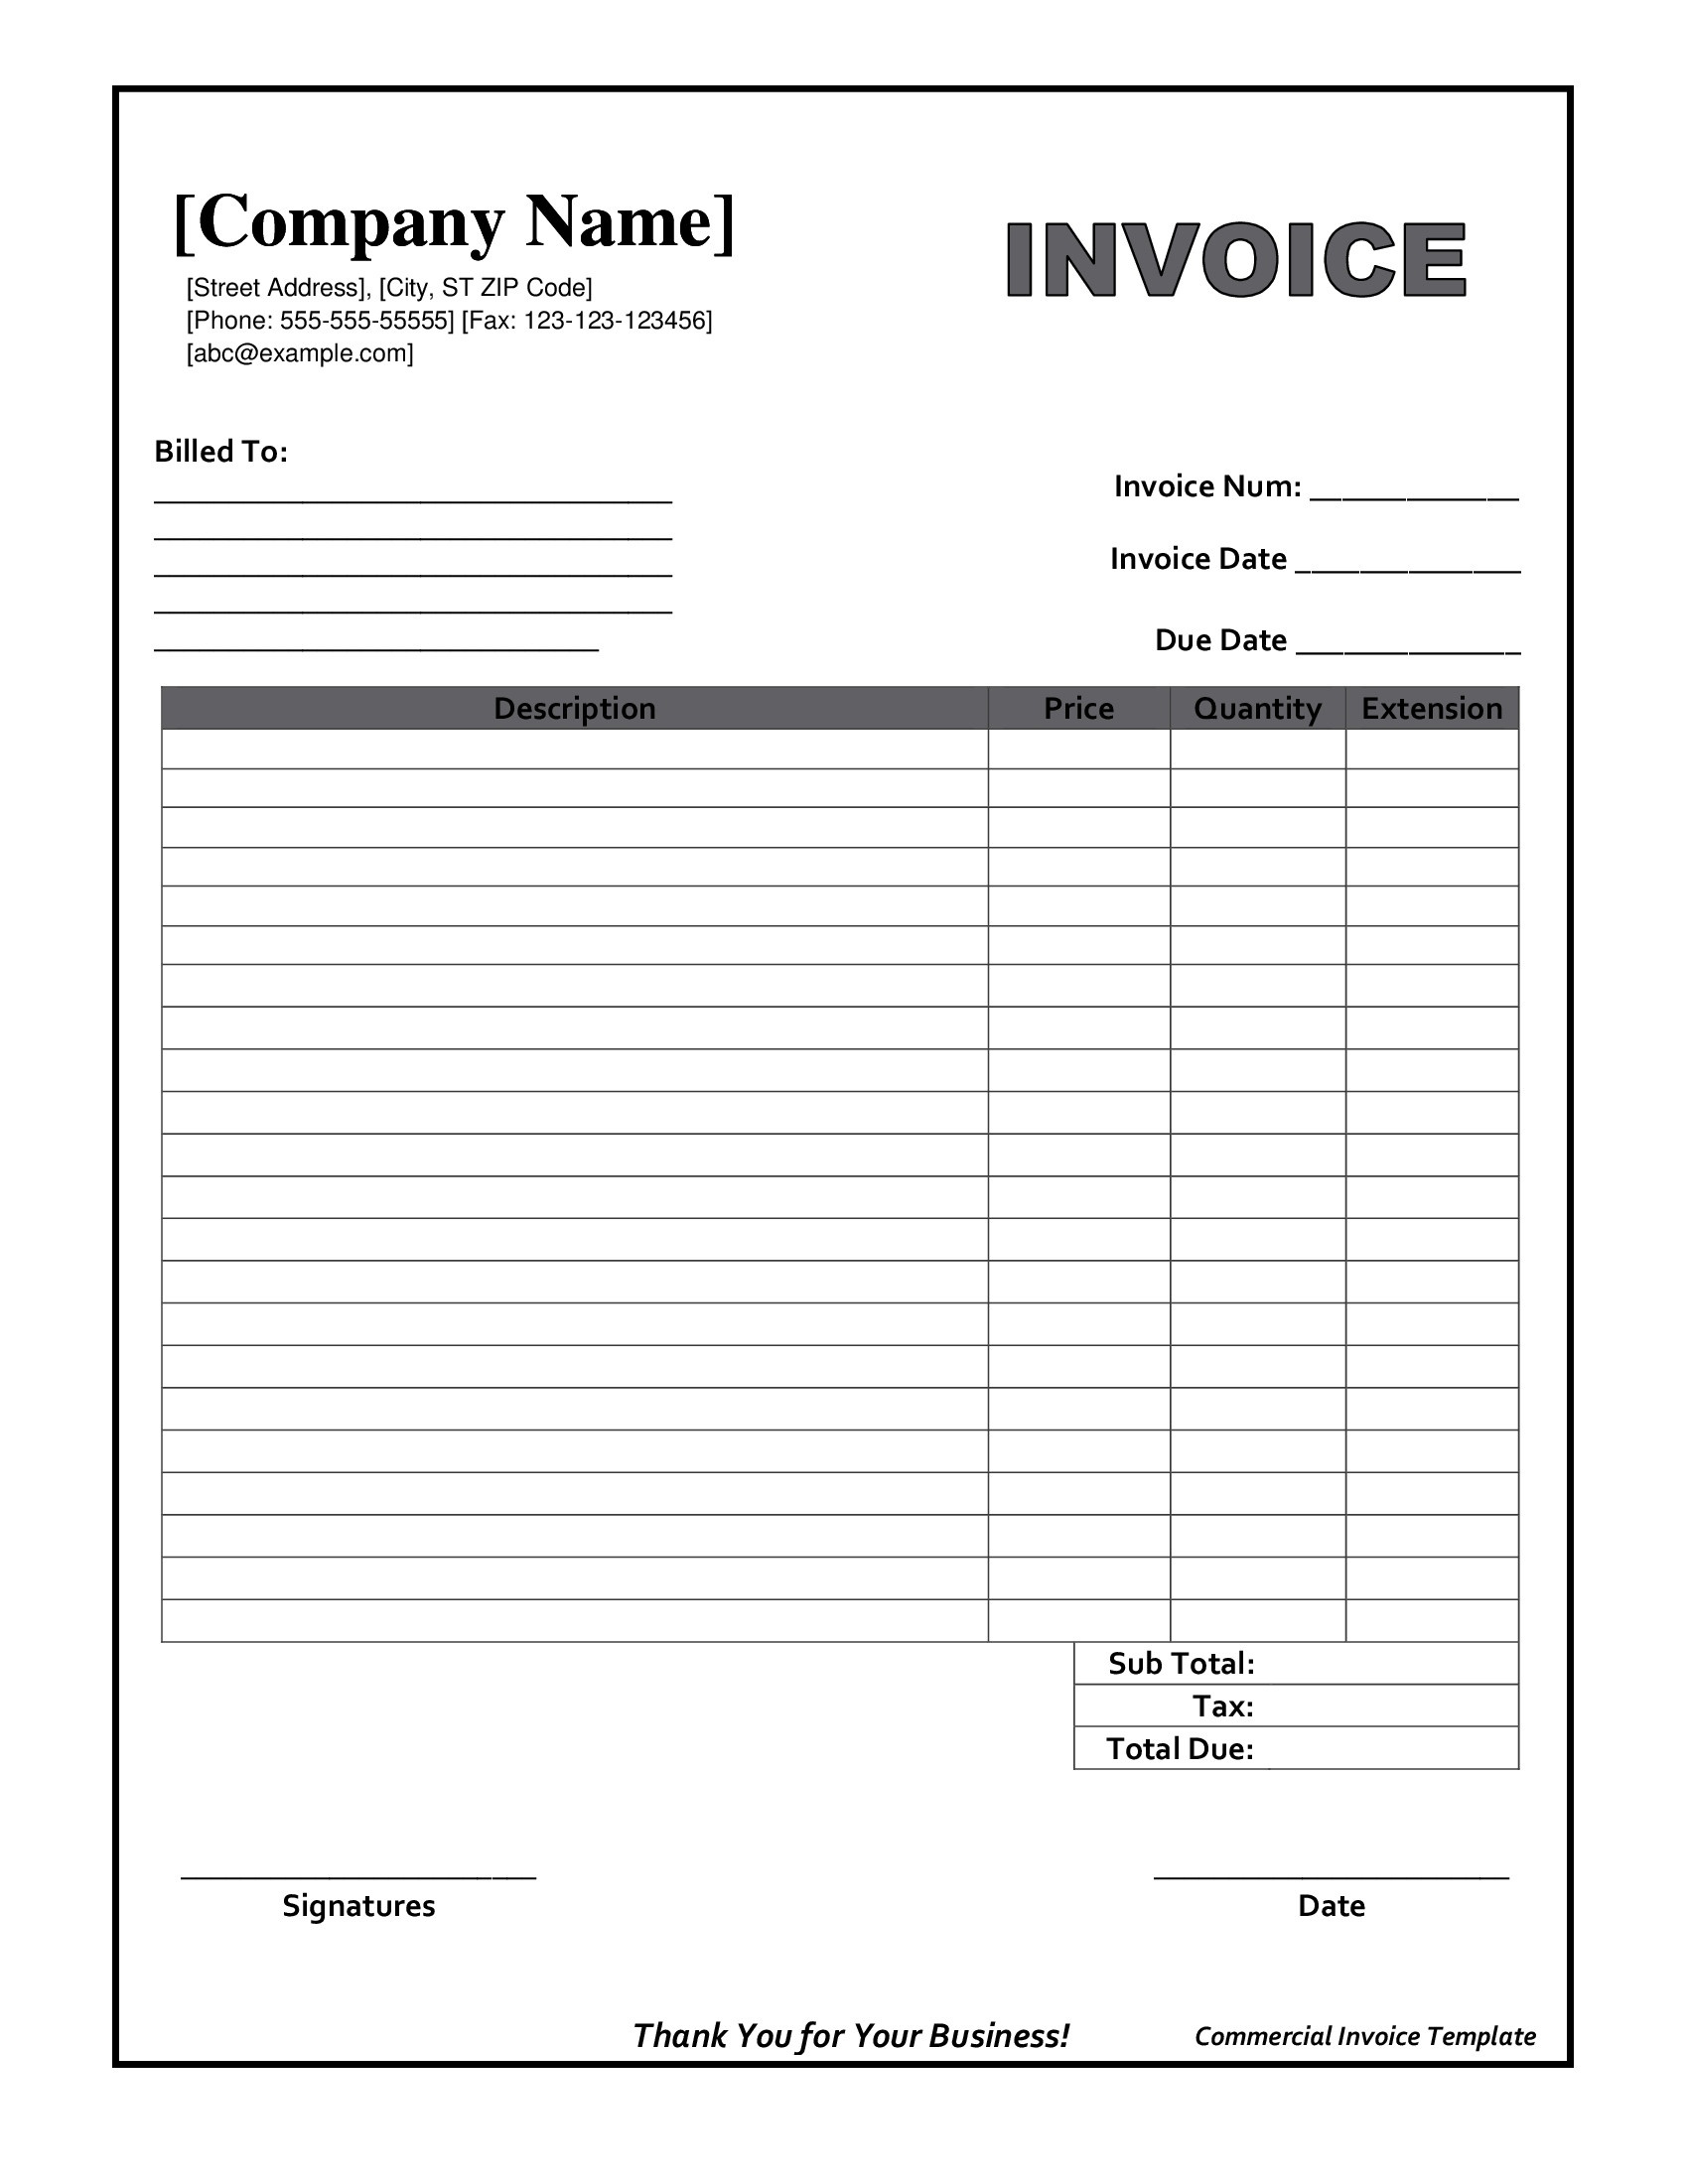 Free Printable Invoices Download Fresh 30 Examples Blank Invoice - Free Printable Blank Invoice Sheet